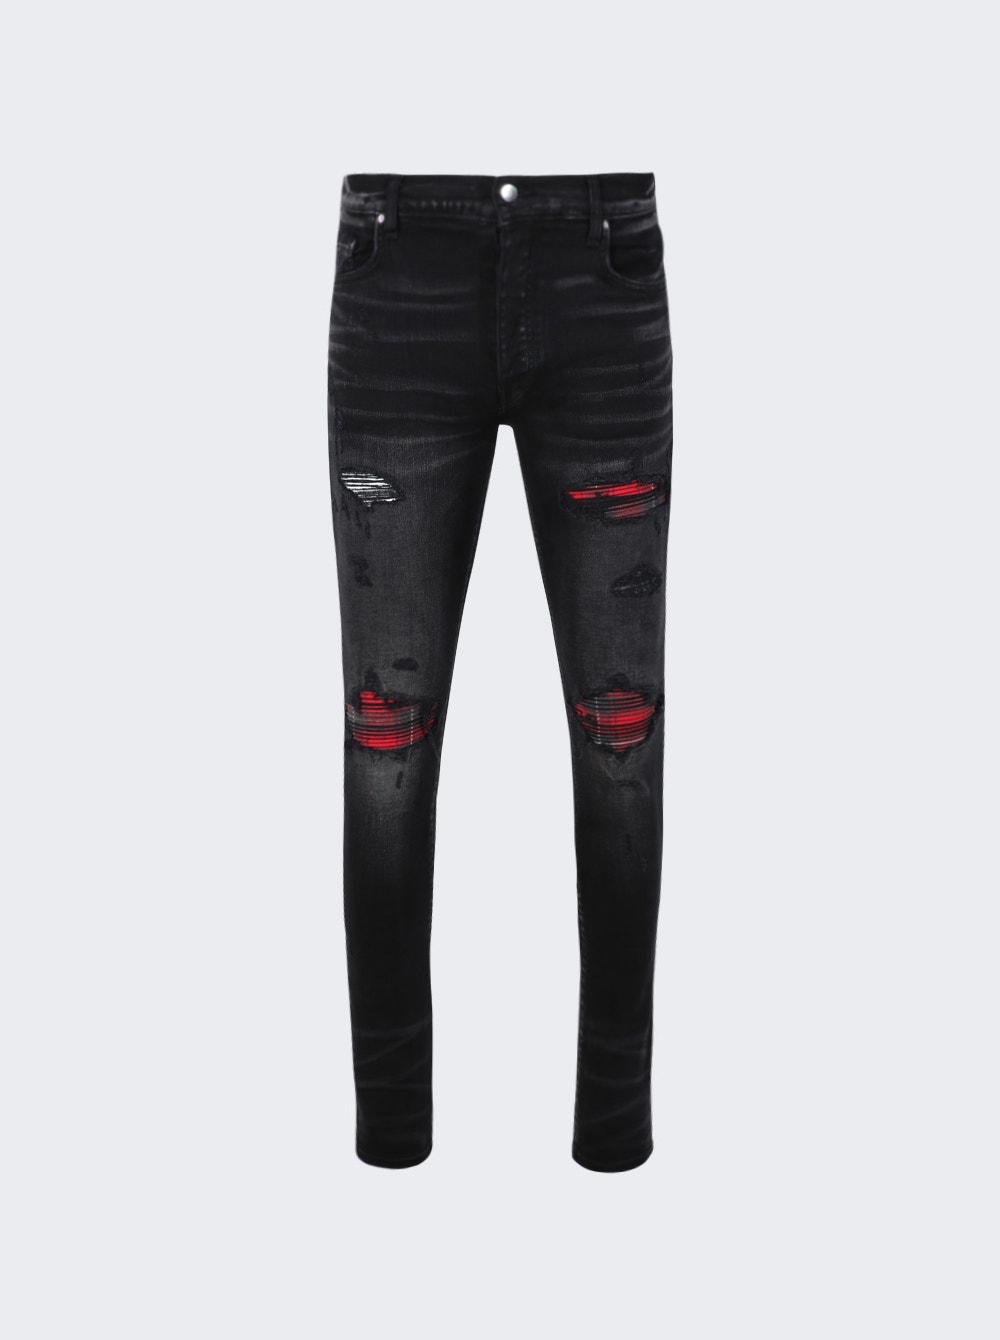 Flannel MX1 Jeans Aged Black by AMIRI